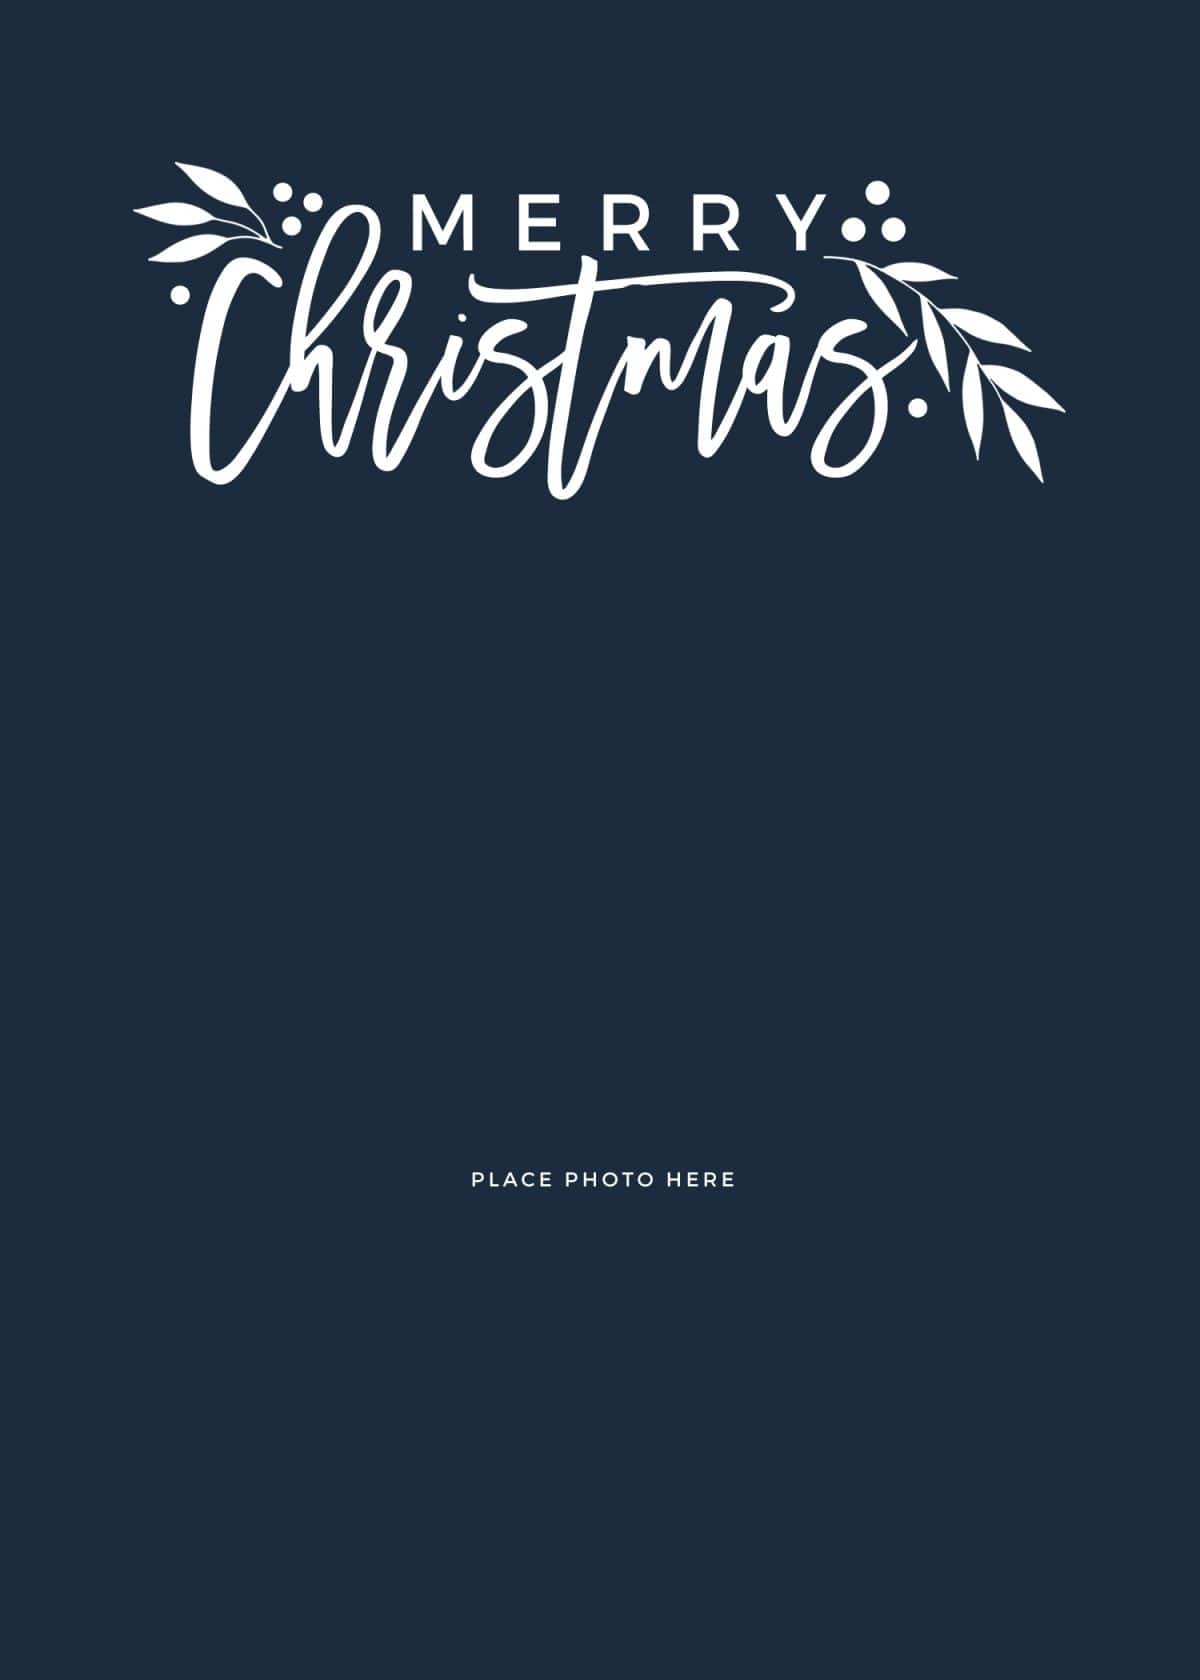 FREE Christmas Card Template Ideas | Somewhat Simple